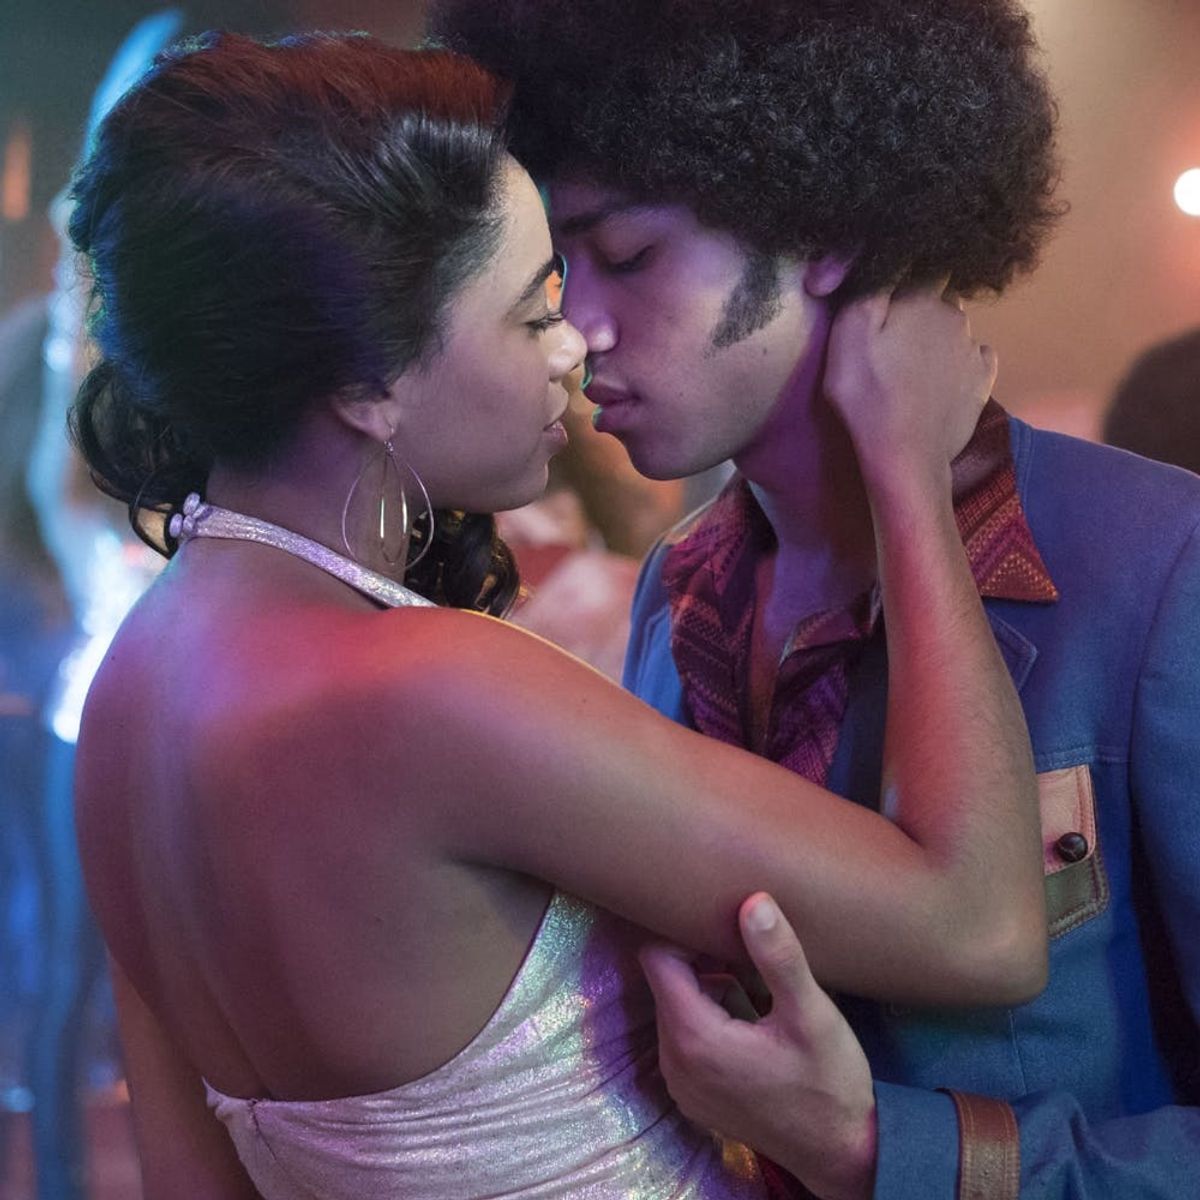 After You Finish Bingeing The Get Down, Watch These 4 Shows